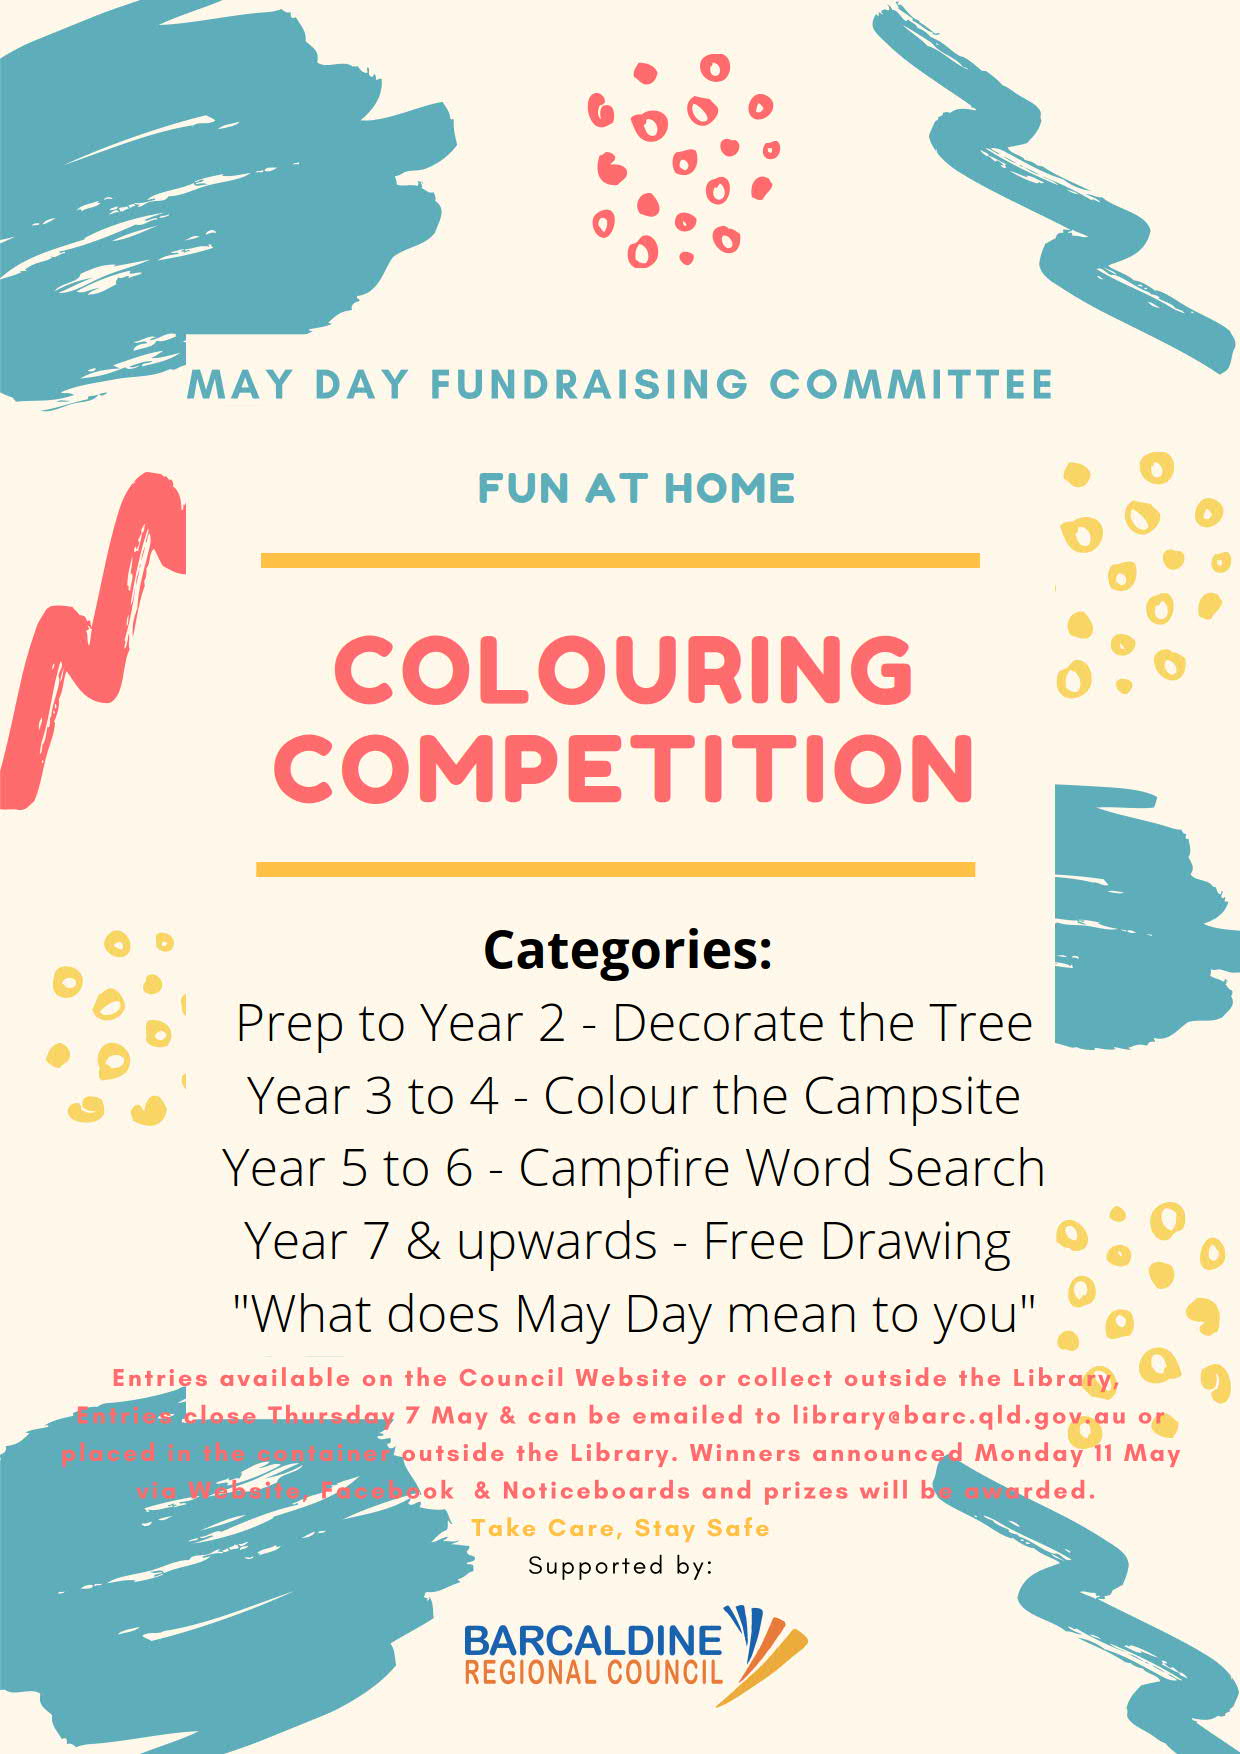 2020 May Day Fundraising Committee - Colouring Competition